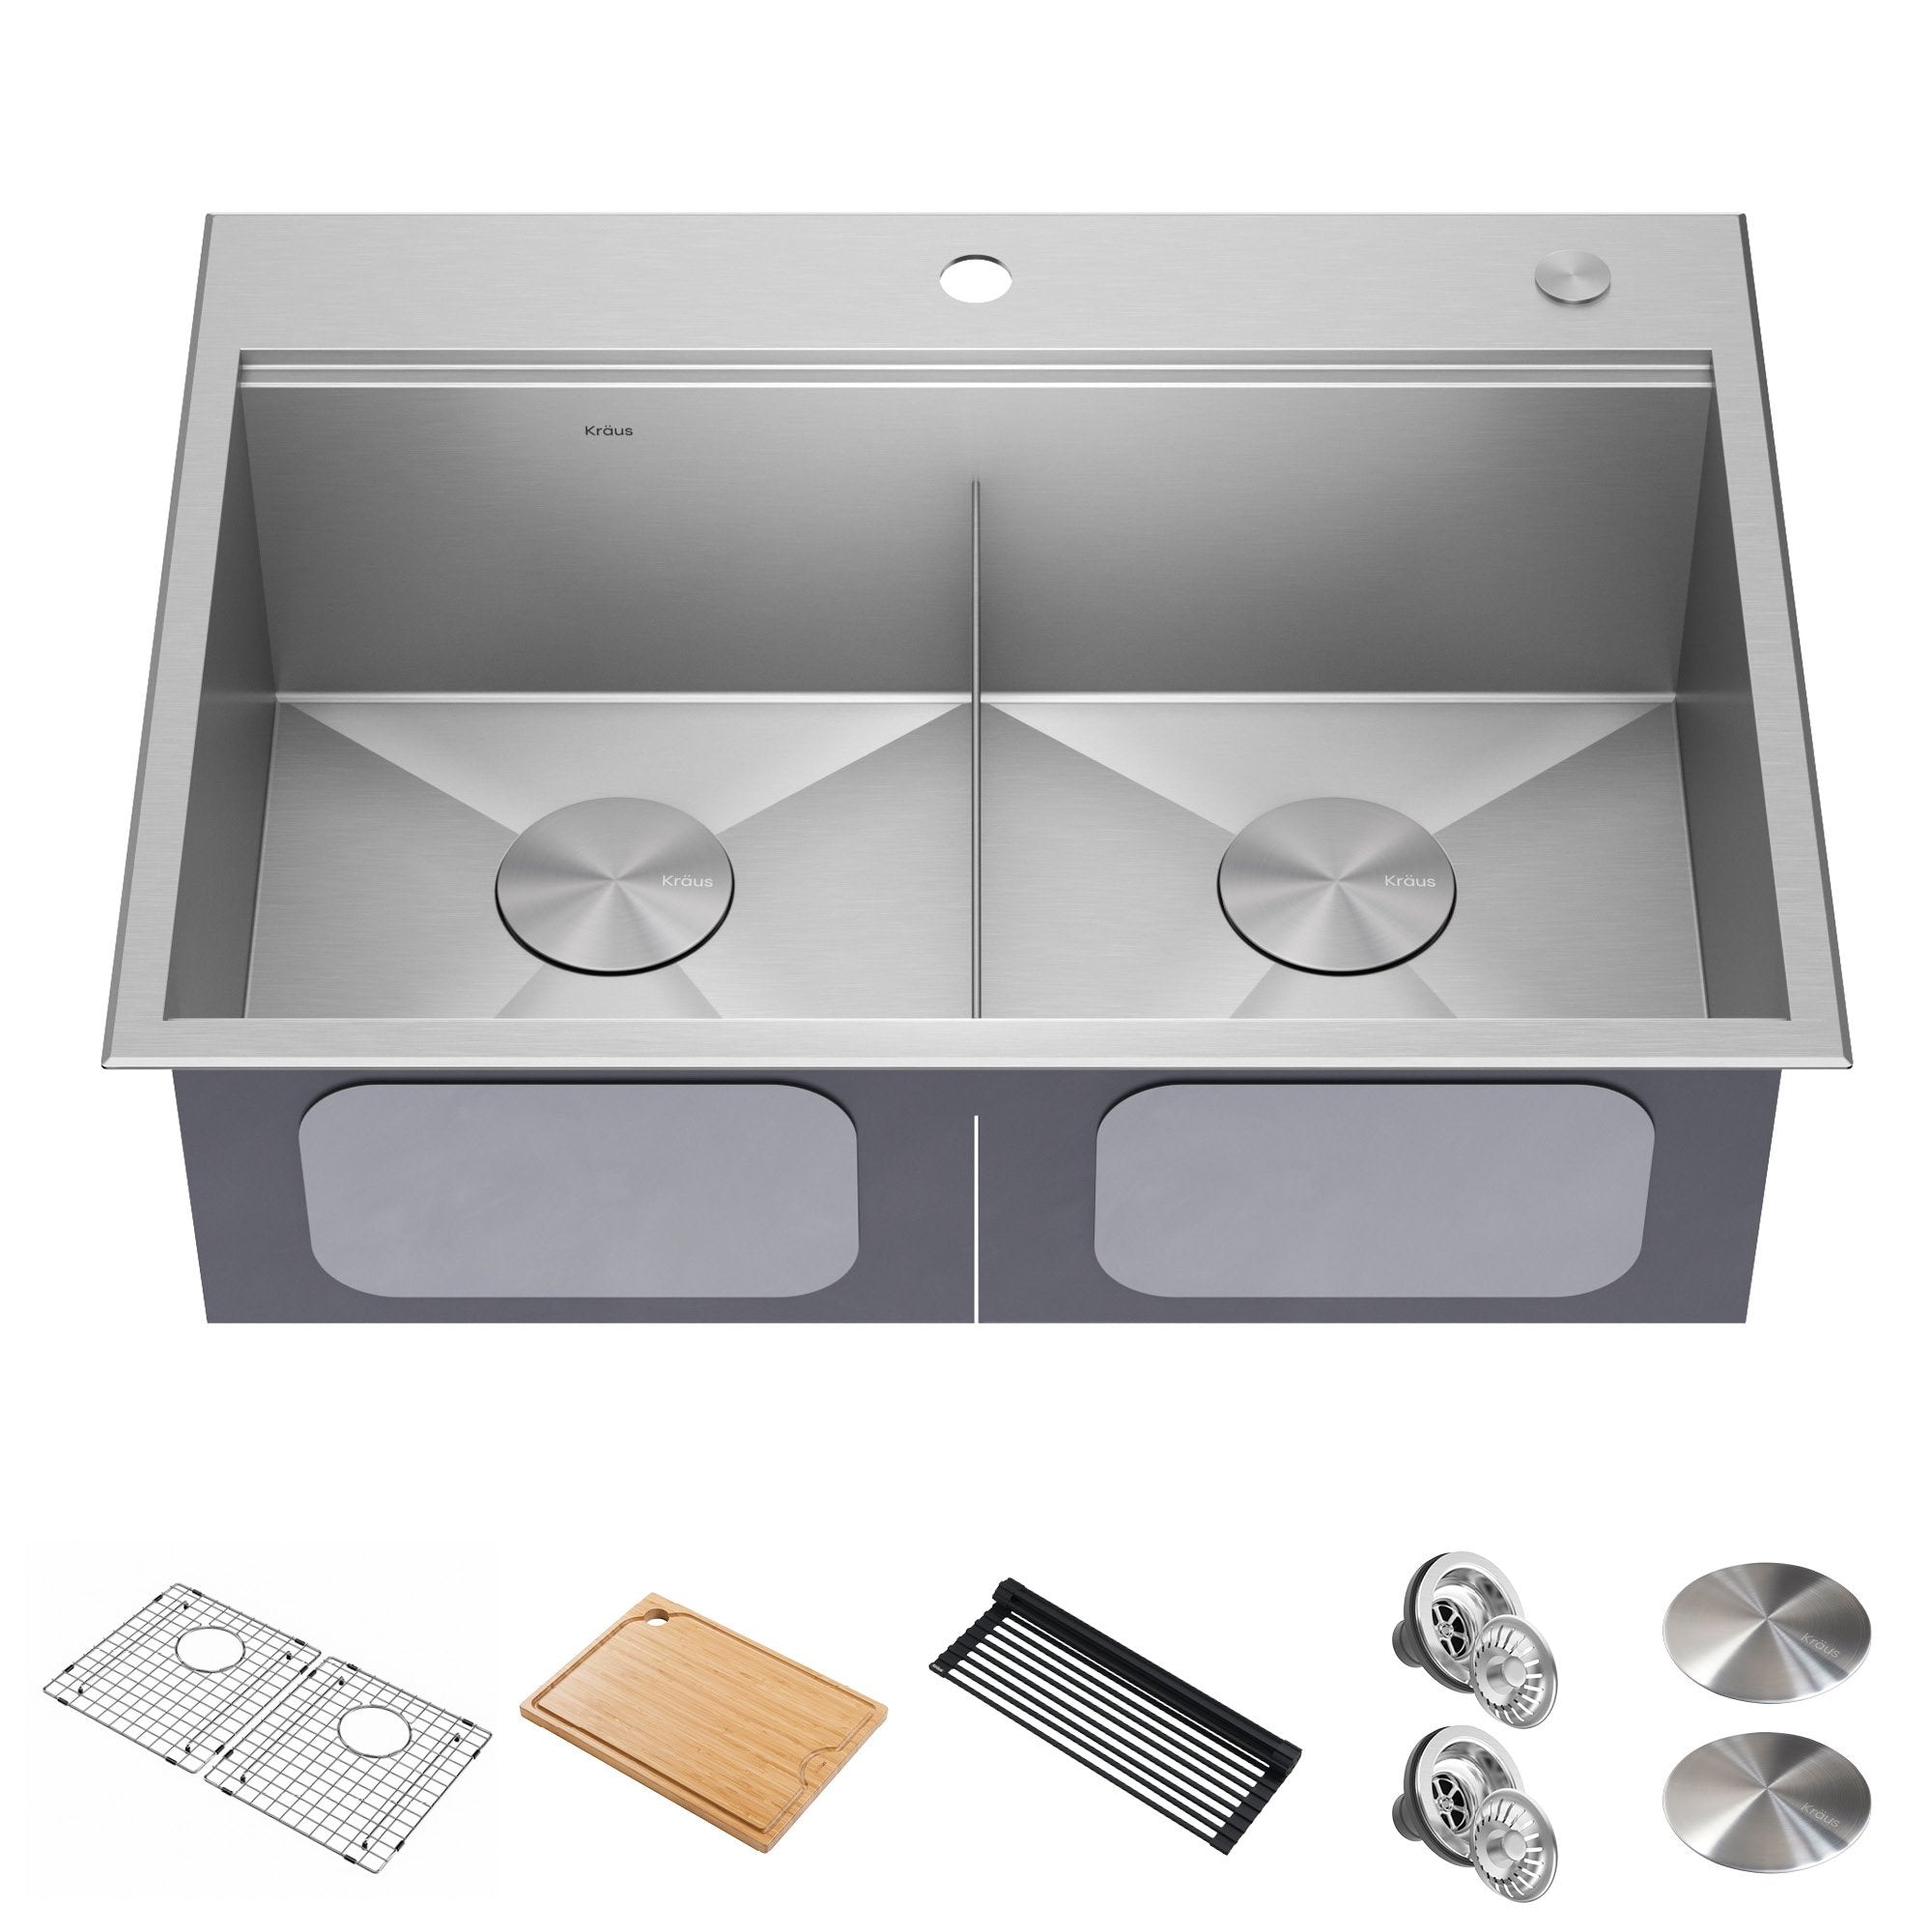 Kraus KWT302-30 is a great double bowl drop in sink for a 30 inch cabinet